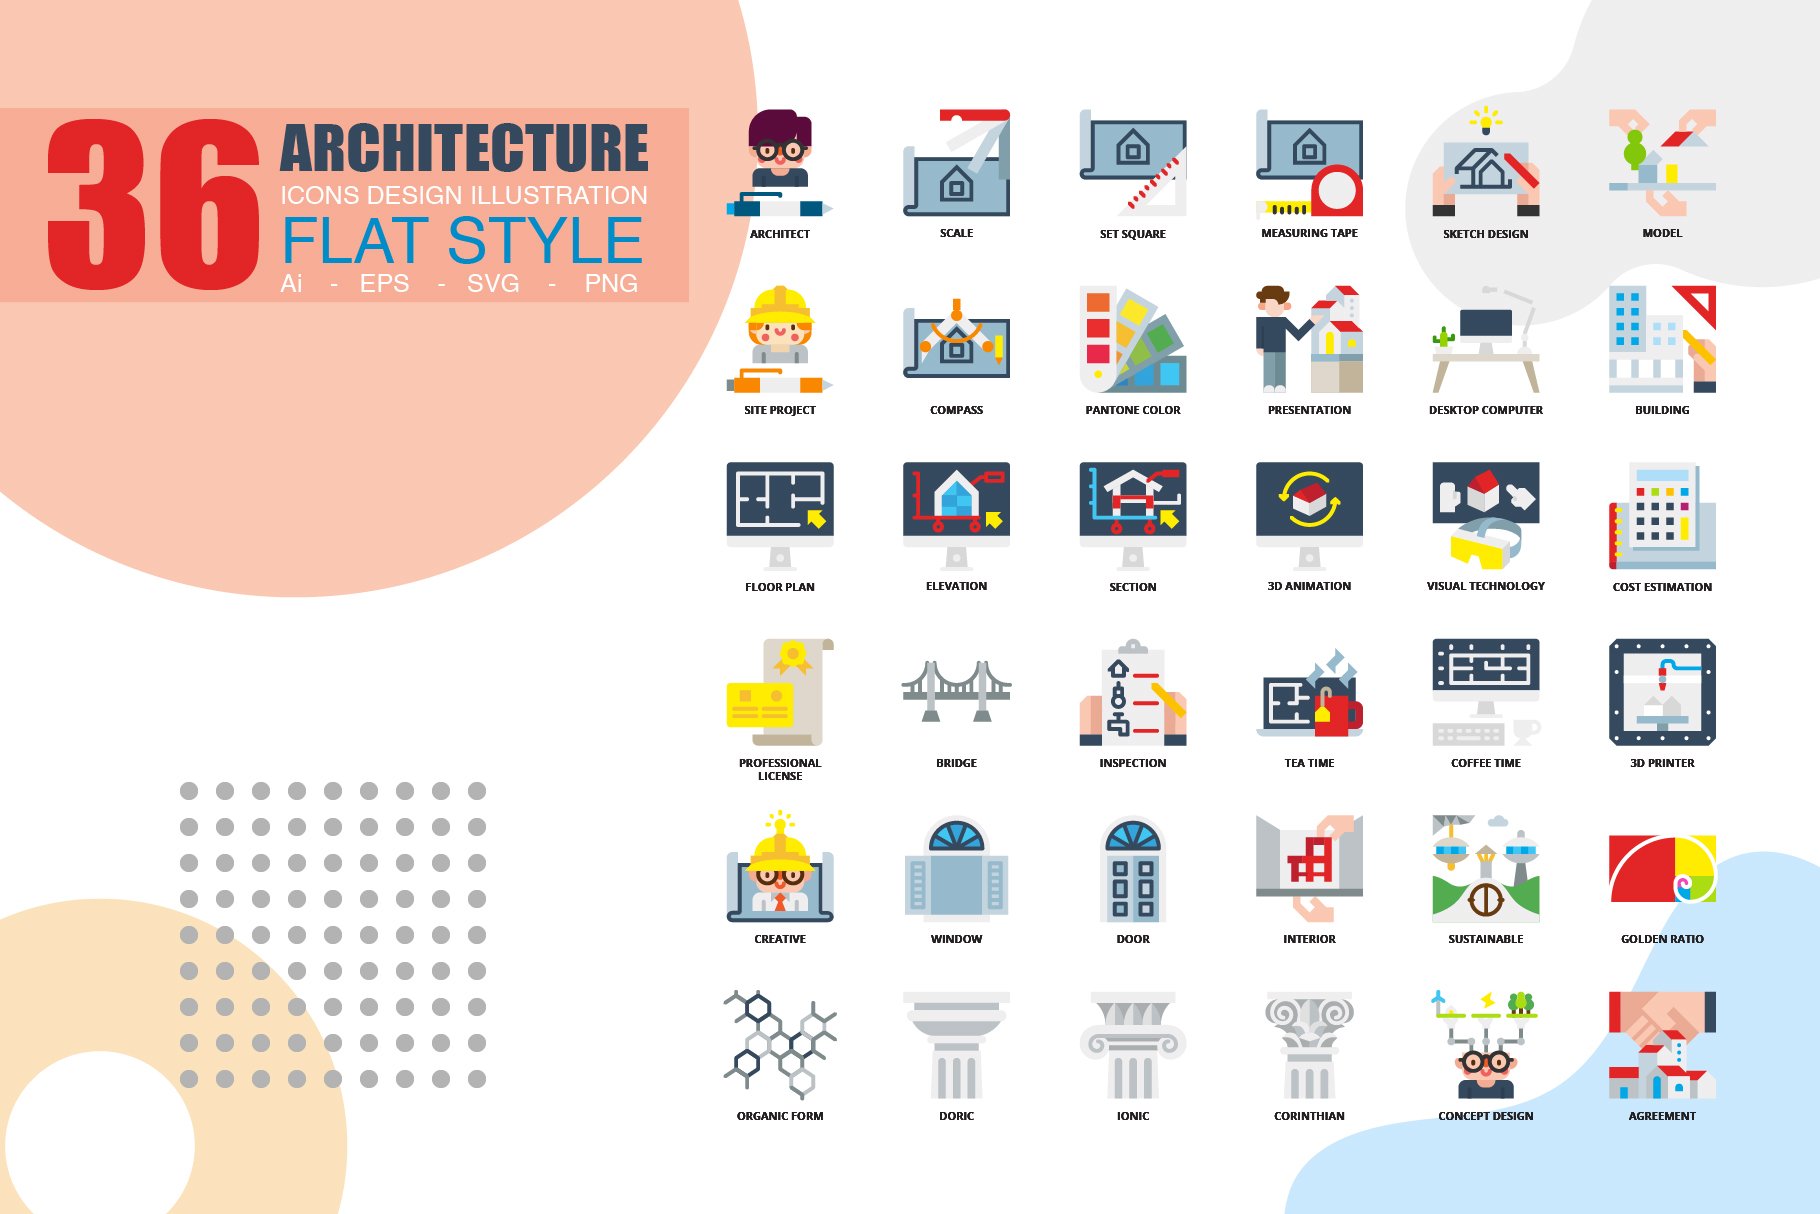 36 Architecture icons set x 3 style preview image.